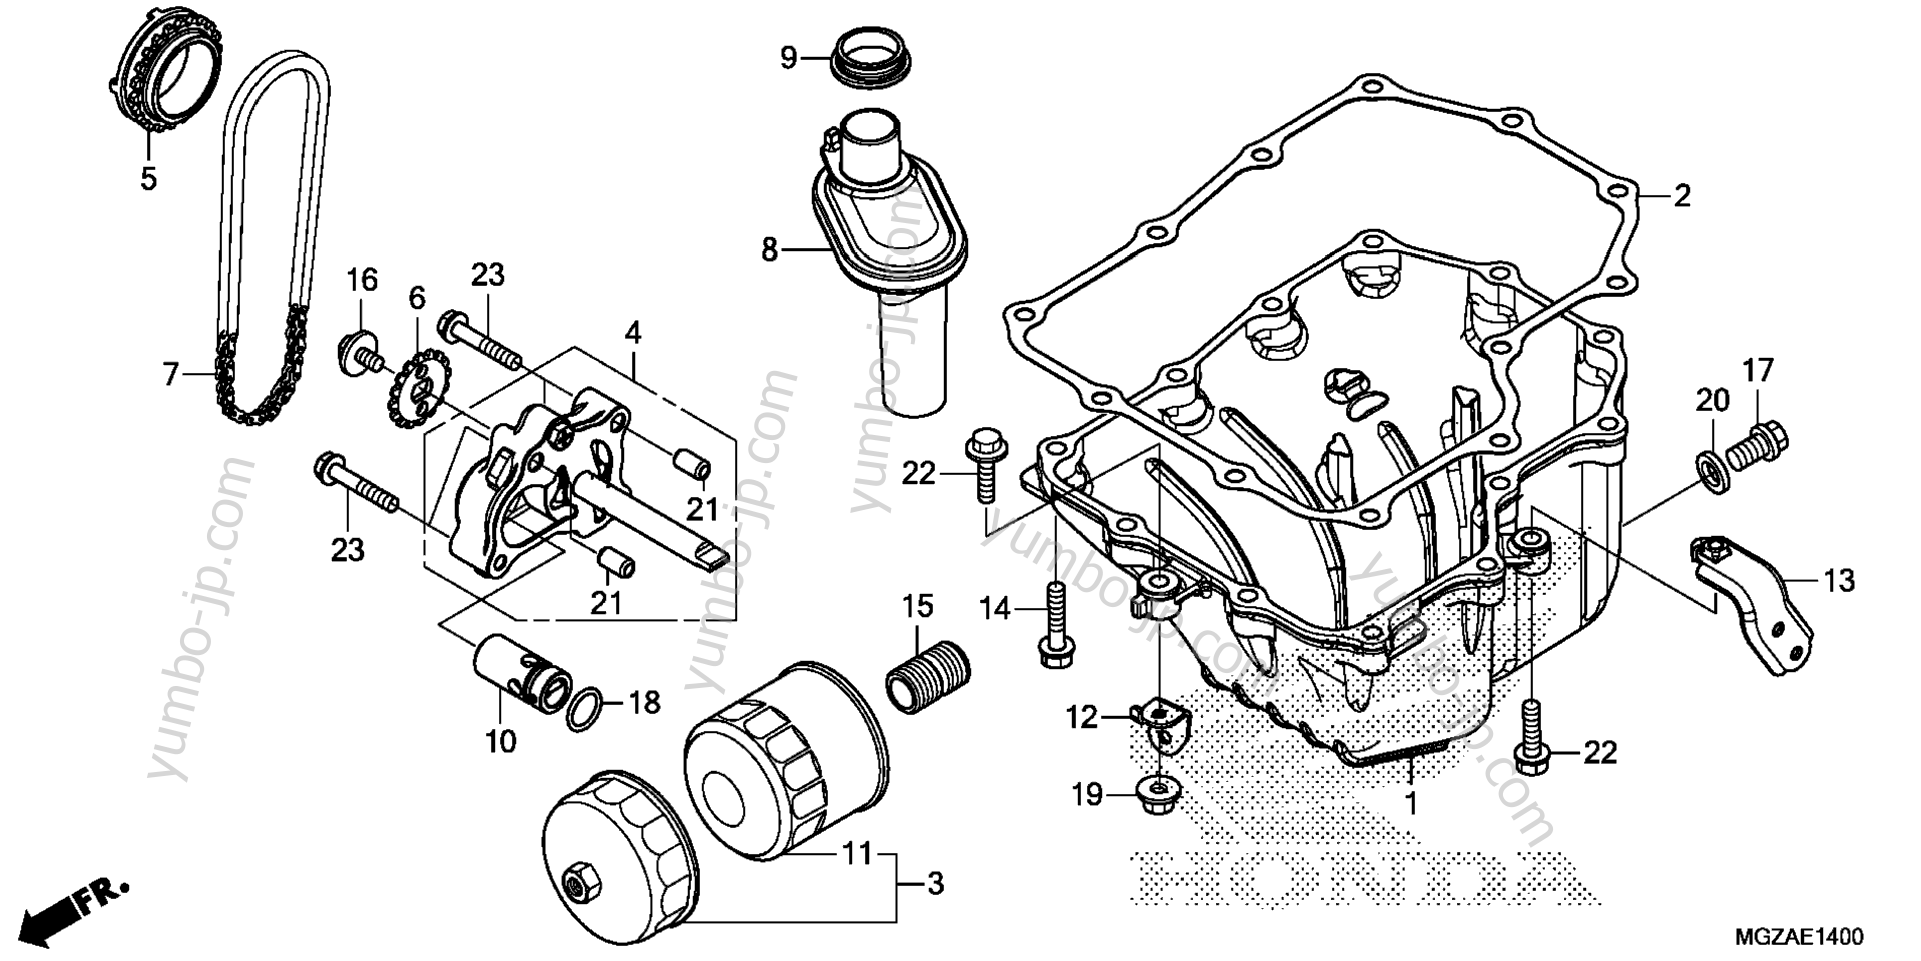 OIL PAN / OIL PUMP for motorcycles HONDA CB500F 3A 2014 year